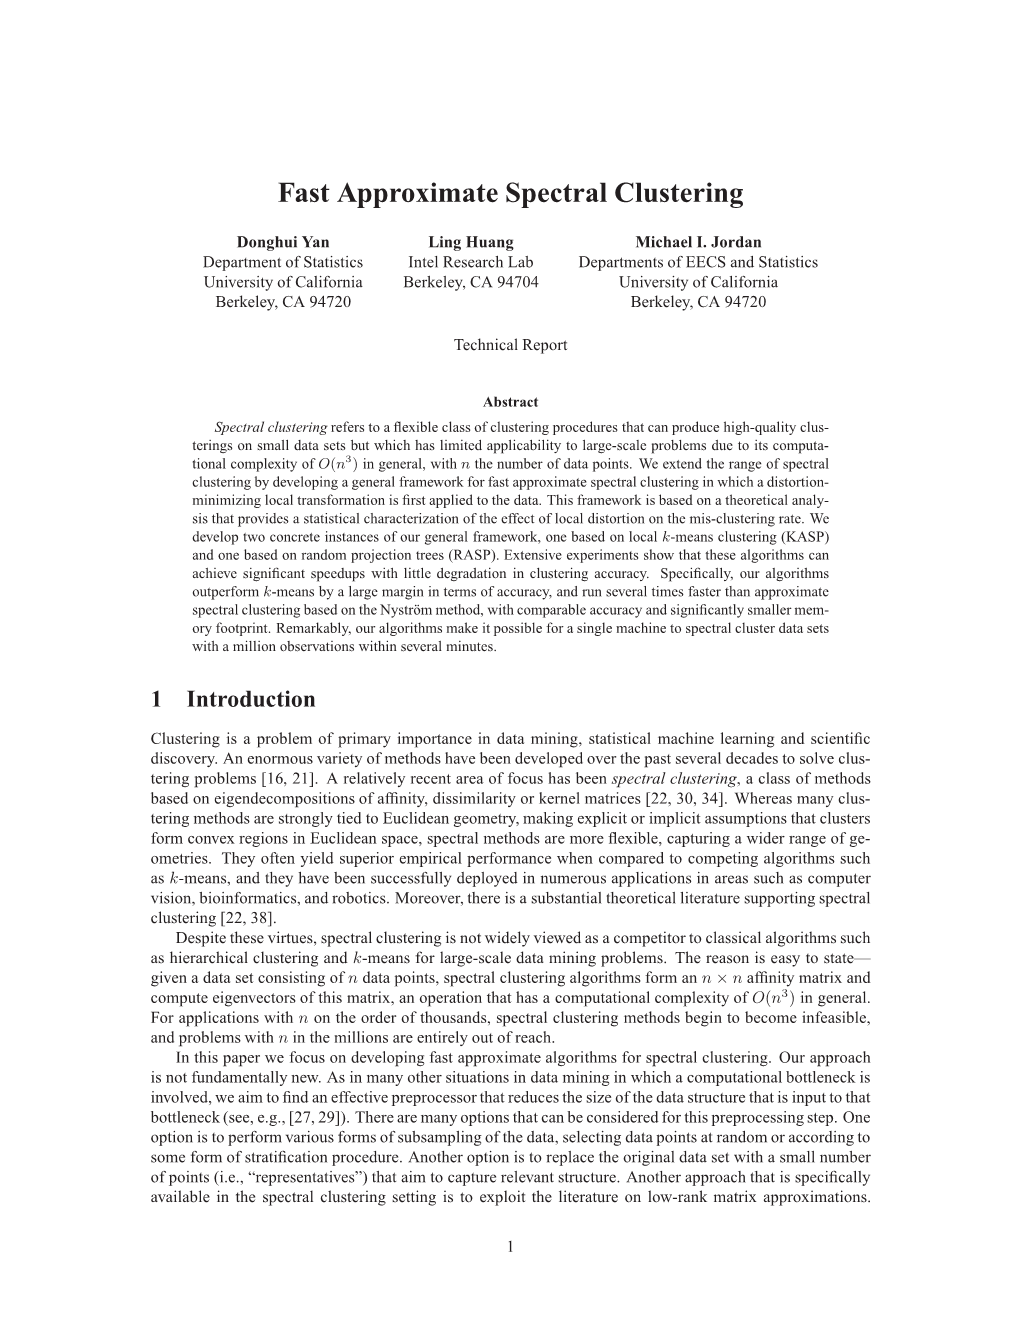 Fast Approximate Spectral Clustering